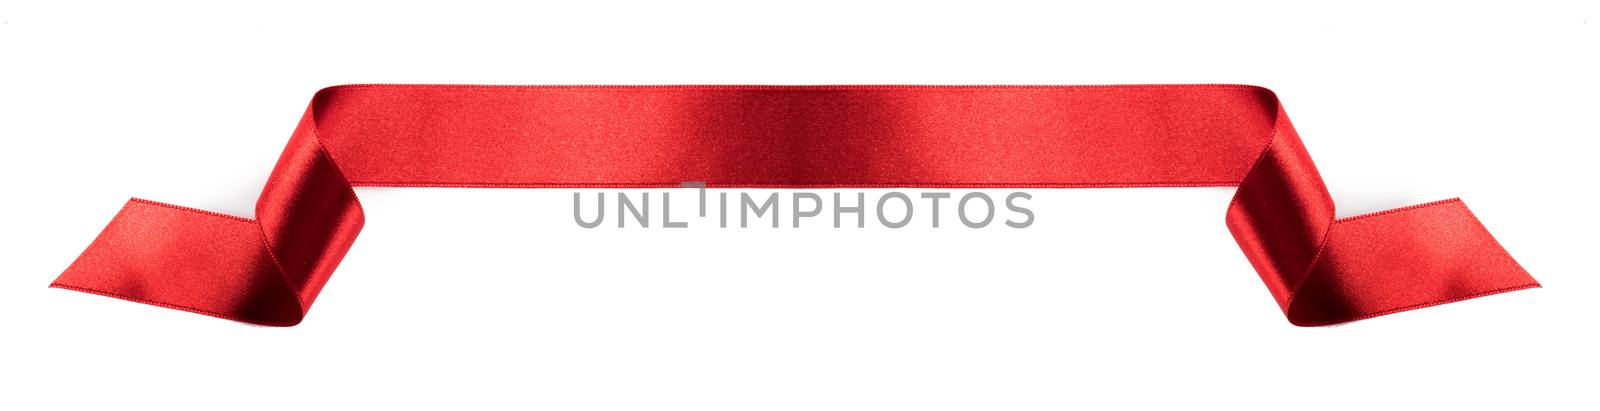 Red satin ribbon banner isolated on white background